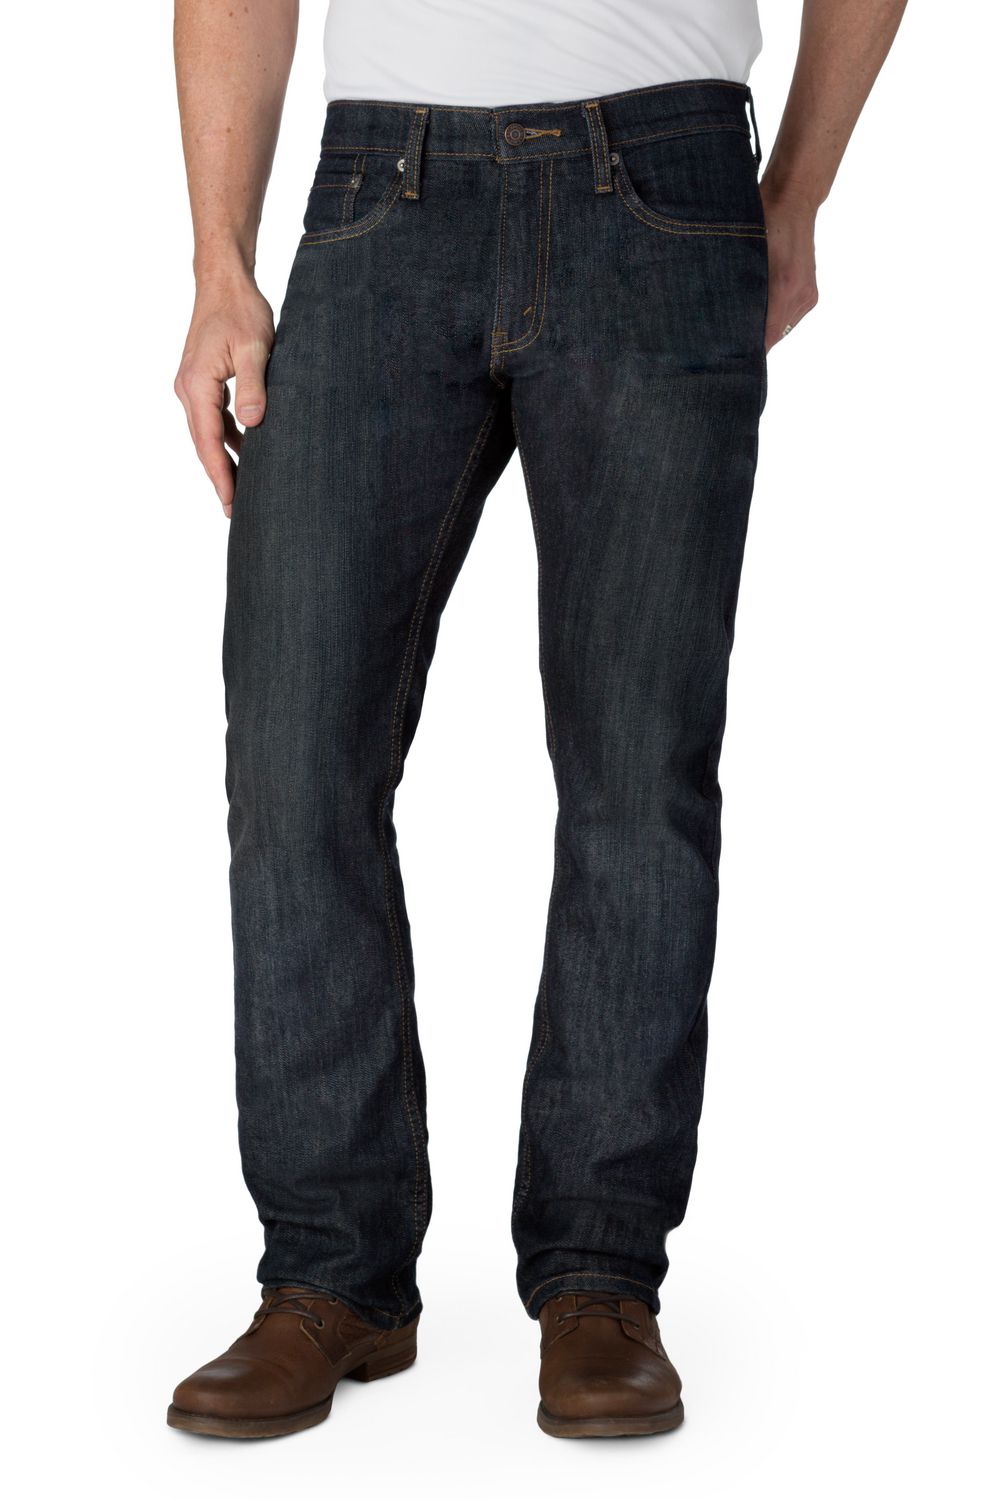 Signature by Levi Strauss & Co.™ Men's S51 Straight Fit | Walmart Canada